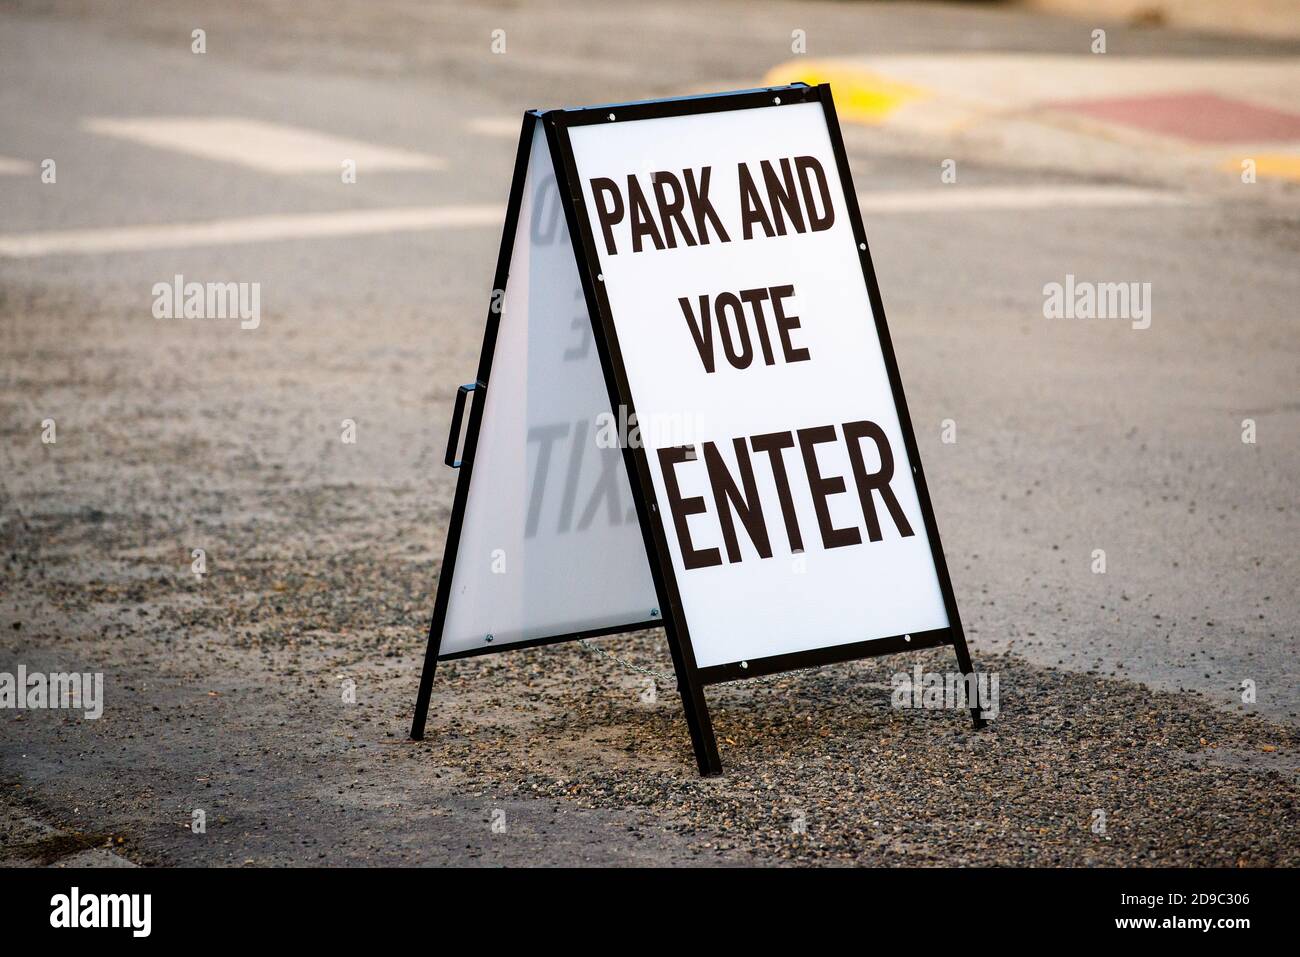 Helena, Montana / November 3, 2020: Park and vote sign in street outside of polling station, Election Day voting for president, Lewis and Clark County Stock Photo